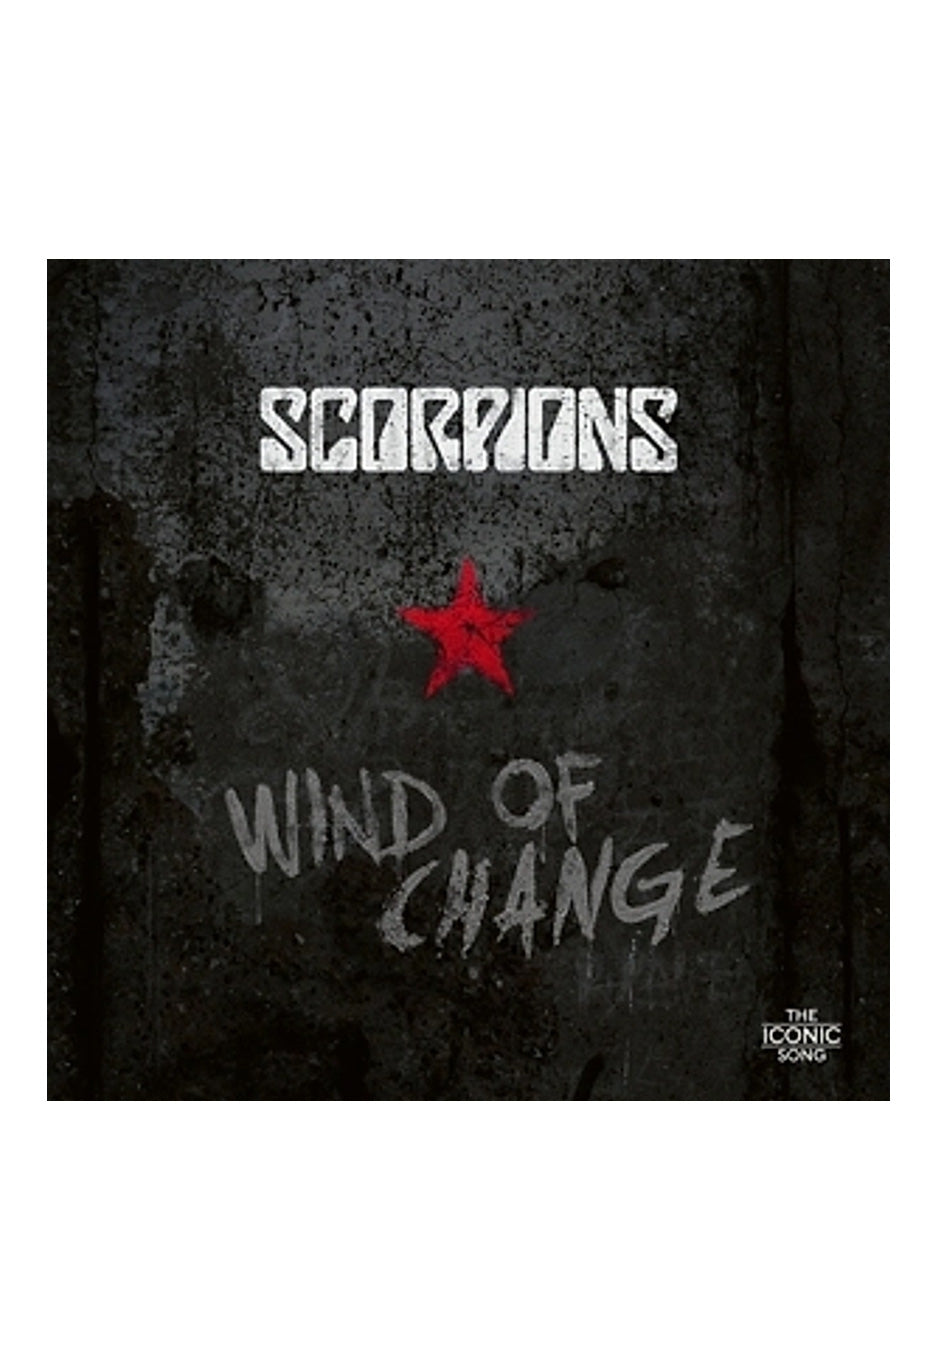 Scorpions - Wind Of Change: The Iconic Song - Vinly + CD Boxset 